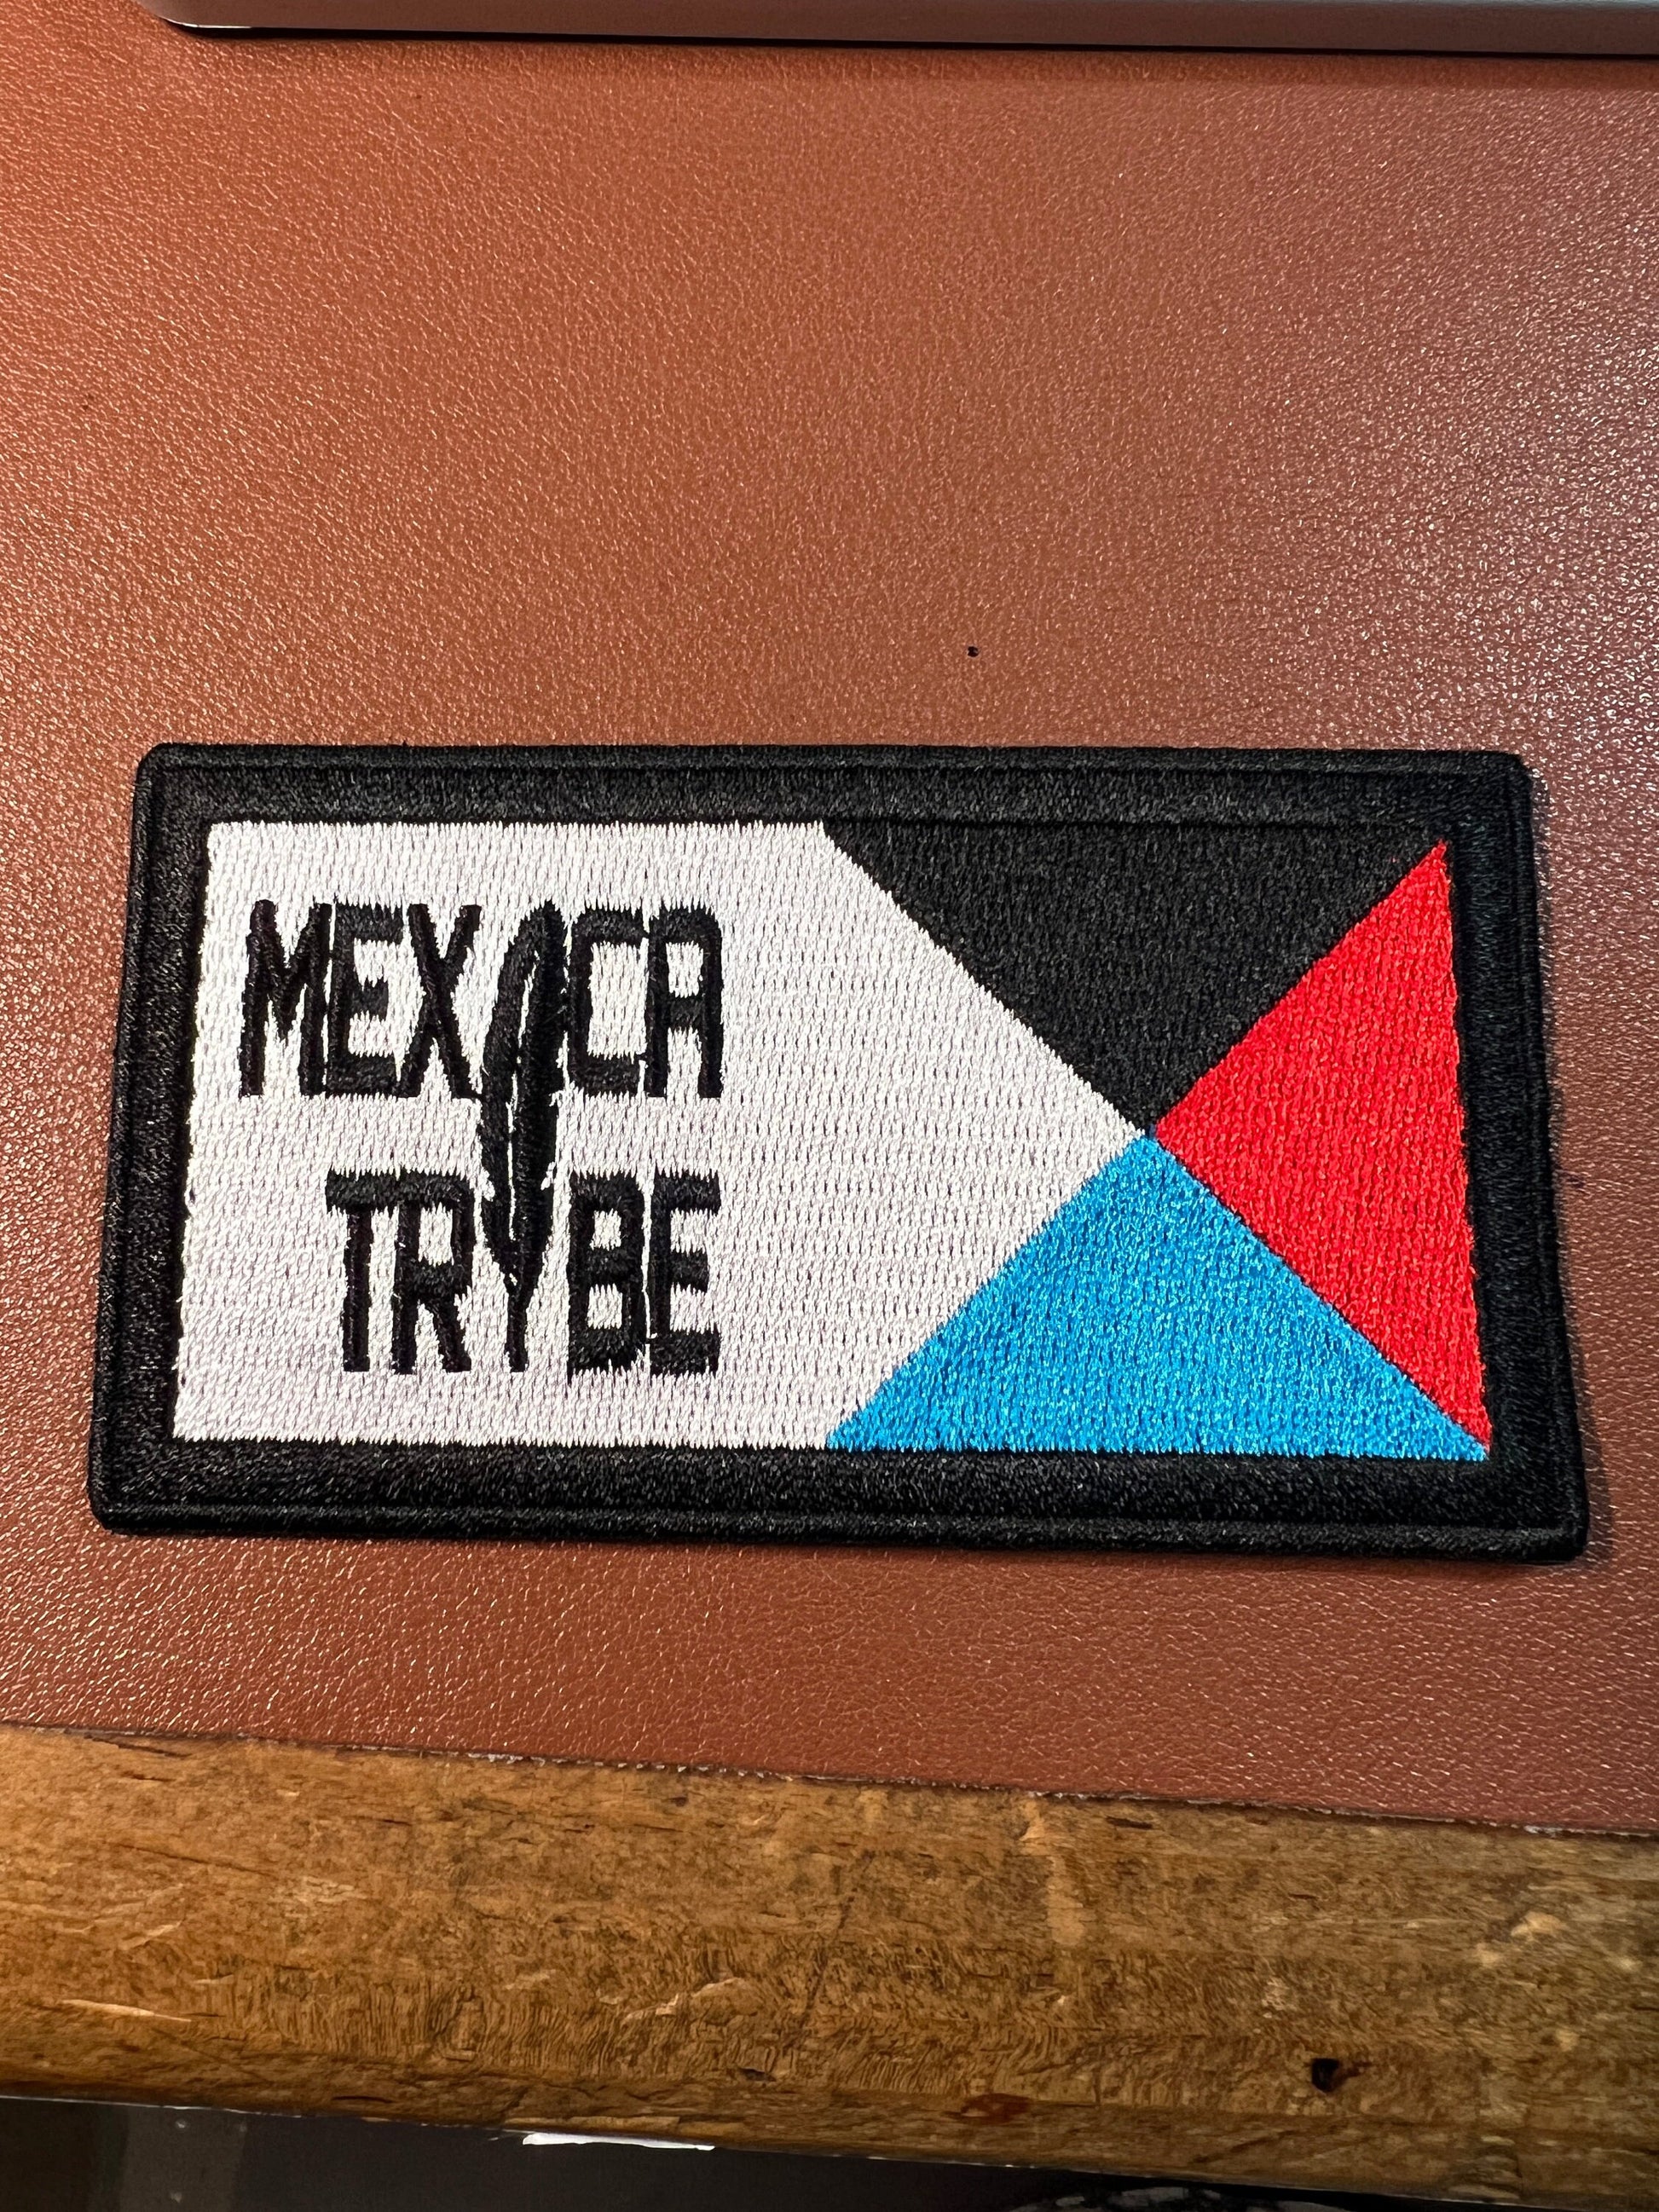 Mexica Tribe patch Tenochtitlan, Feather i, Mexico, Tribal Flag, Eagle atl-tlachinolli water-fire symbol, 4 color directions iron-on patches